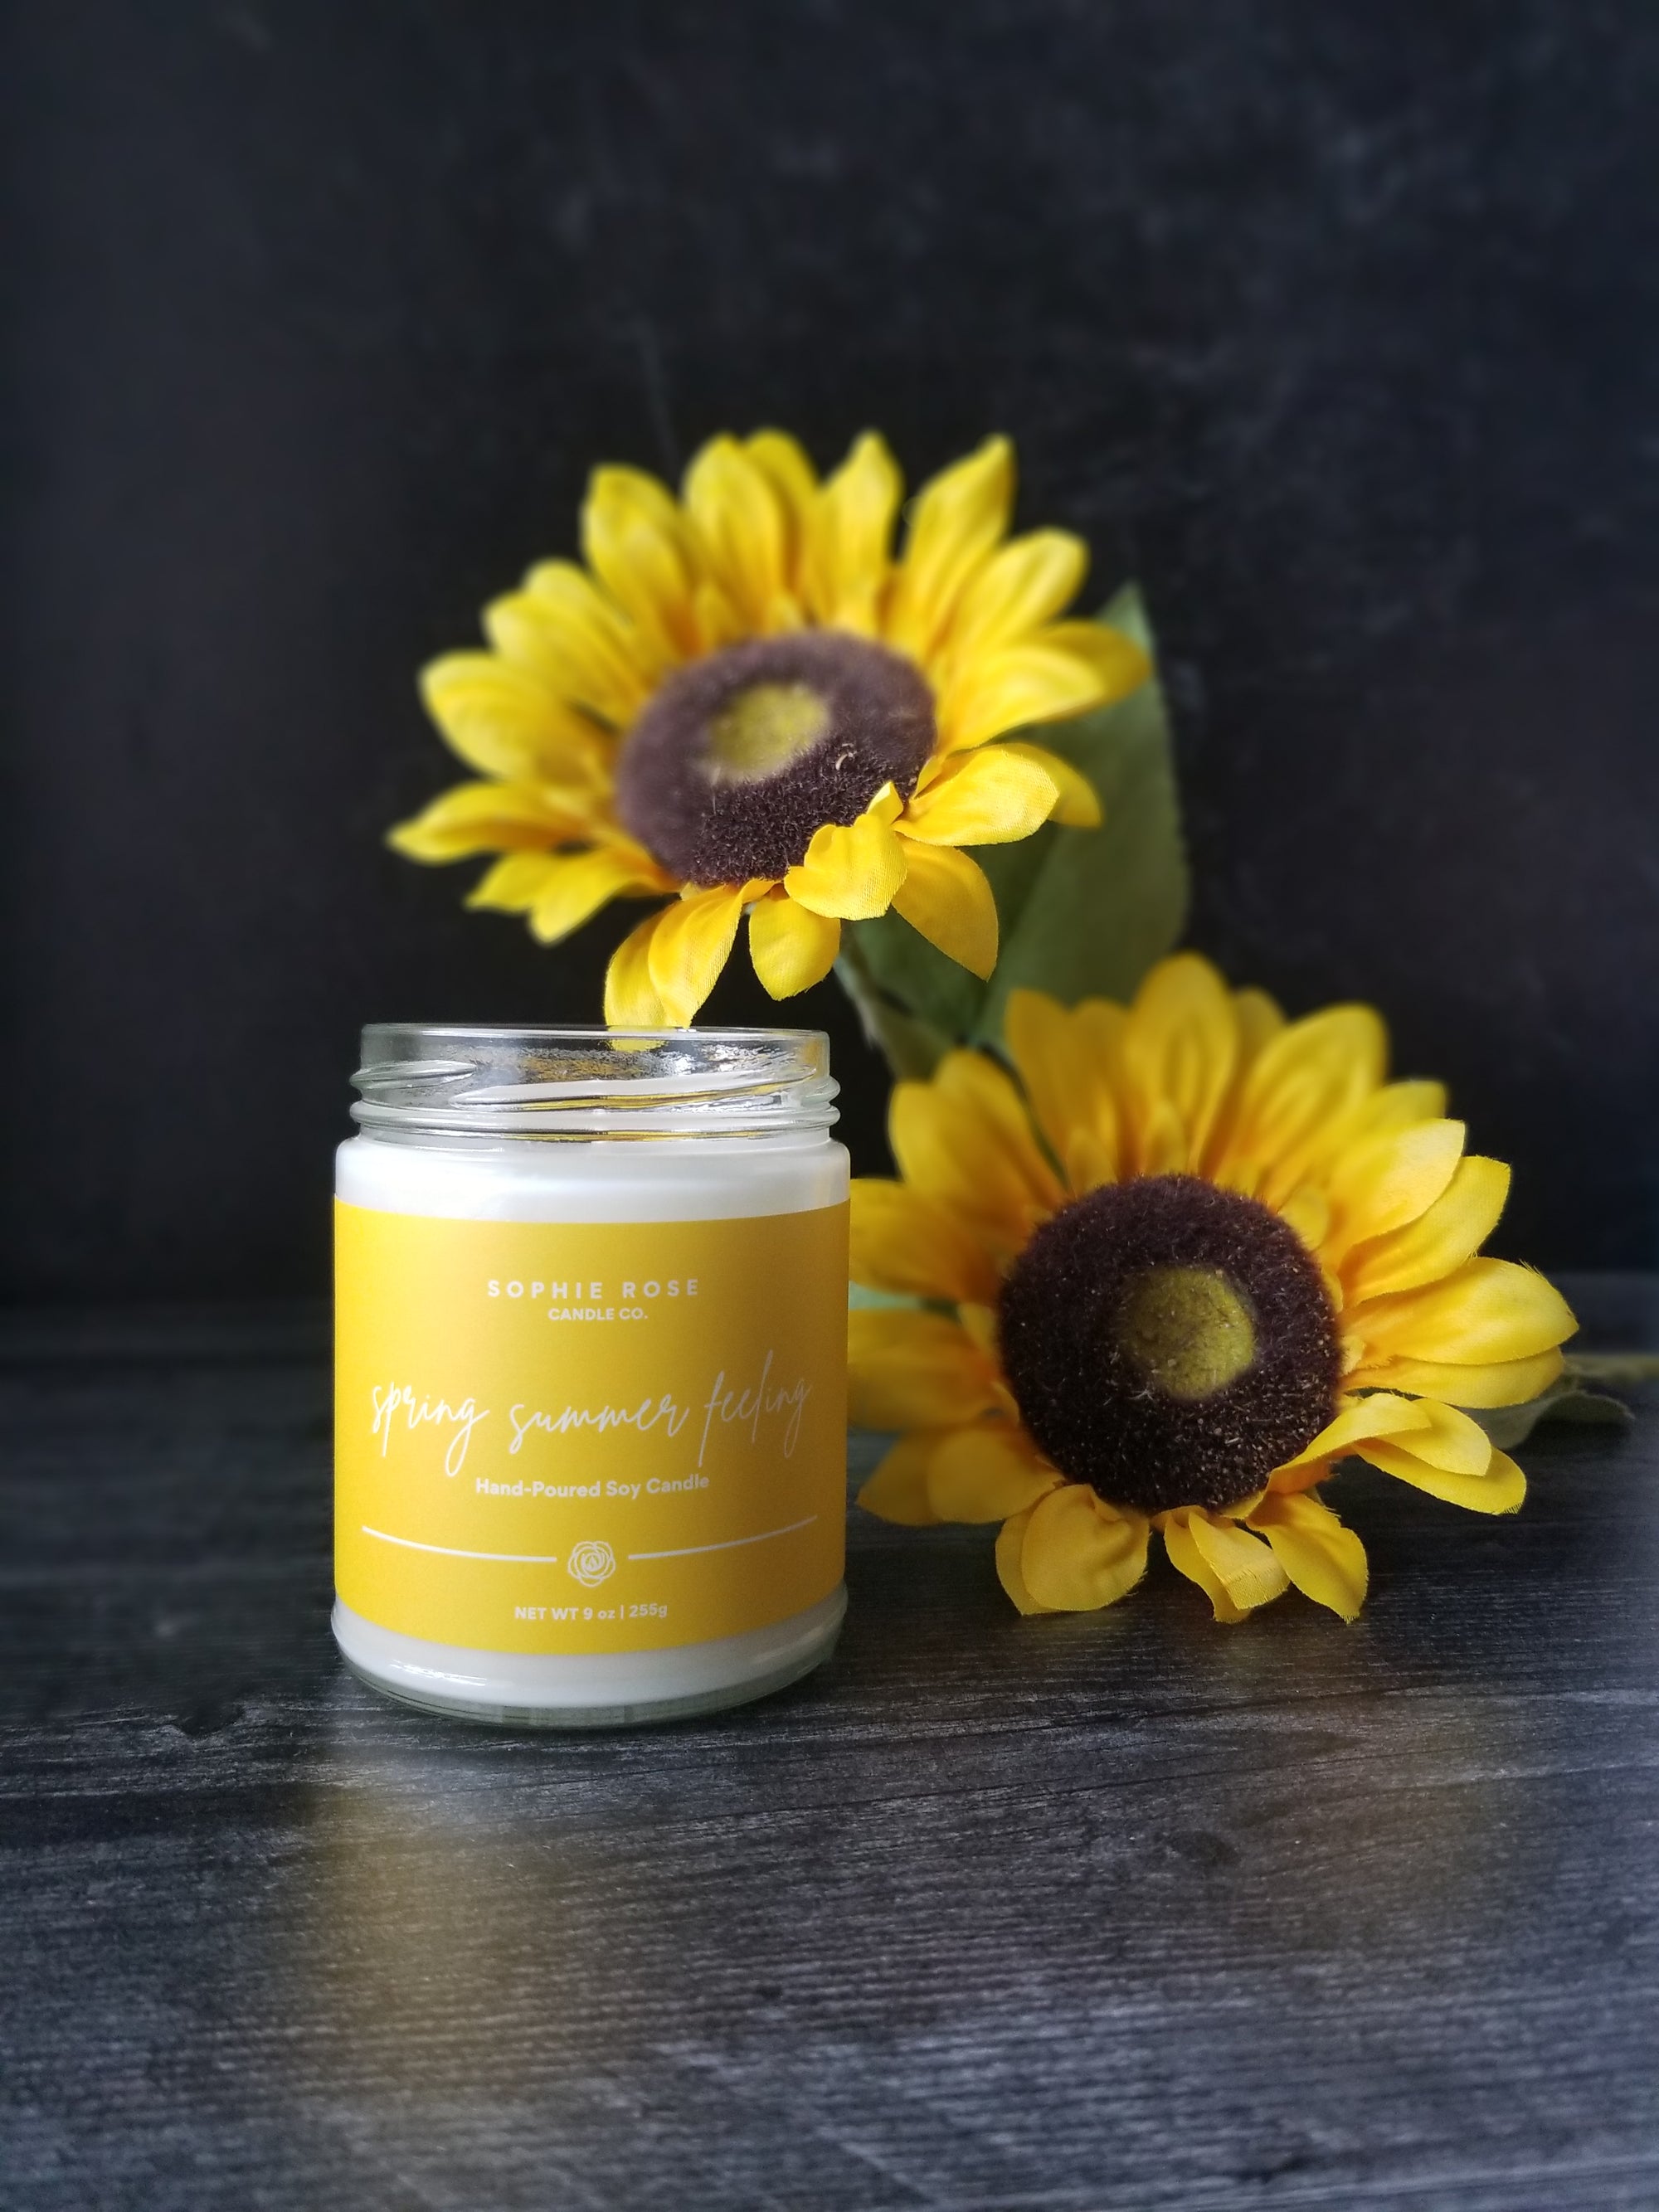 Spring Summer Feeling Candle by Sophie Rose Candle Co. Inspired by Jill Scott's song of the same name.